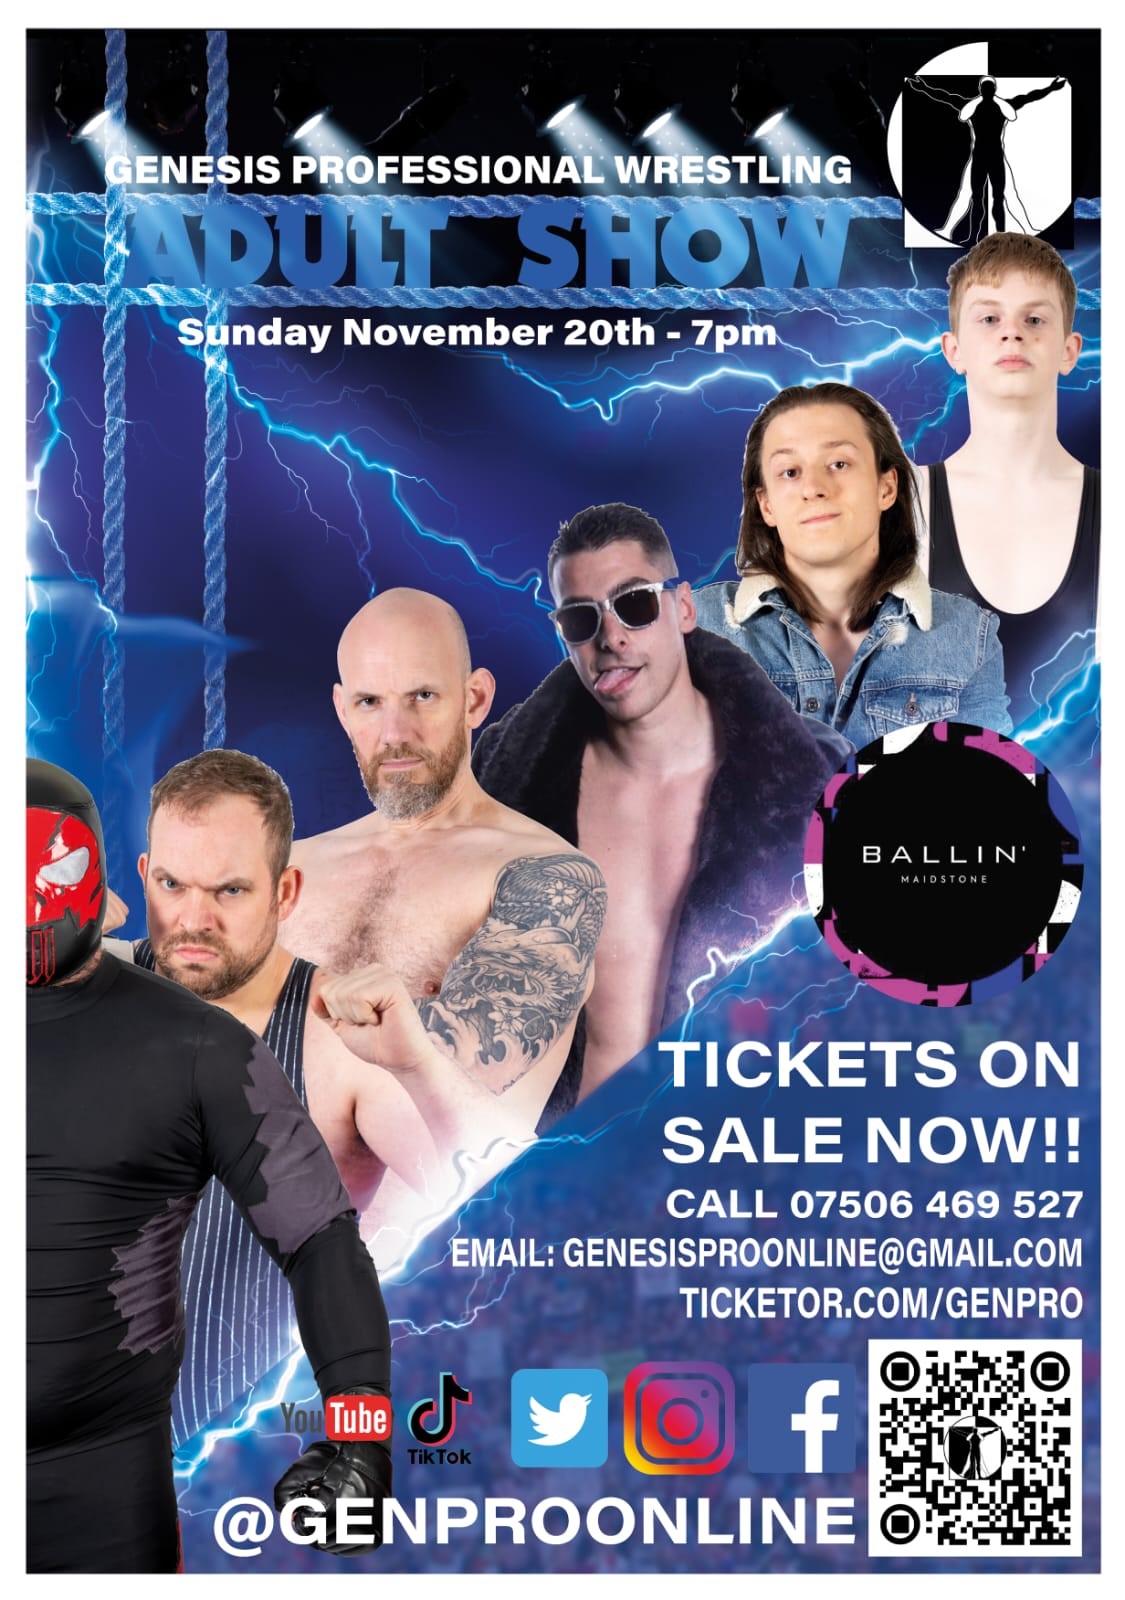 Genesis Professional Wrestling Ballin' Maidstone, Adult Show 7pm on Nov 20, 19:00@Ballin' - Pick a seat, Buy tickets and Get information on Genesis Professional Wrestling 